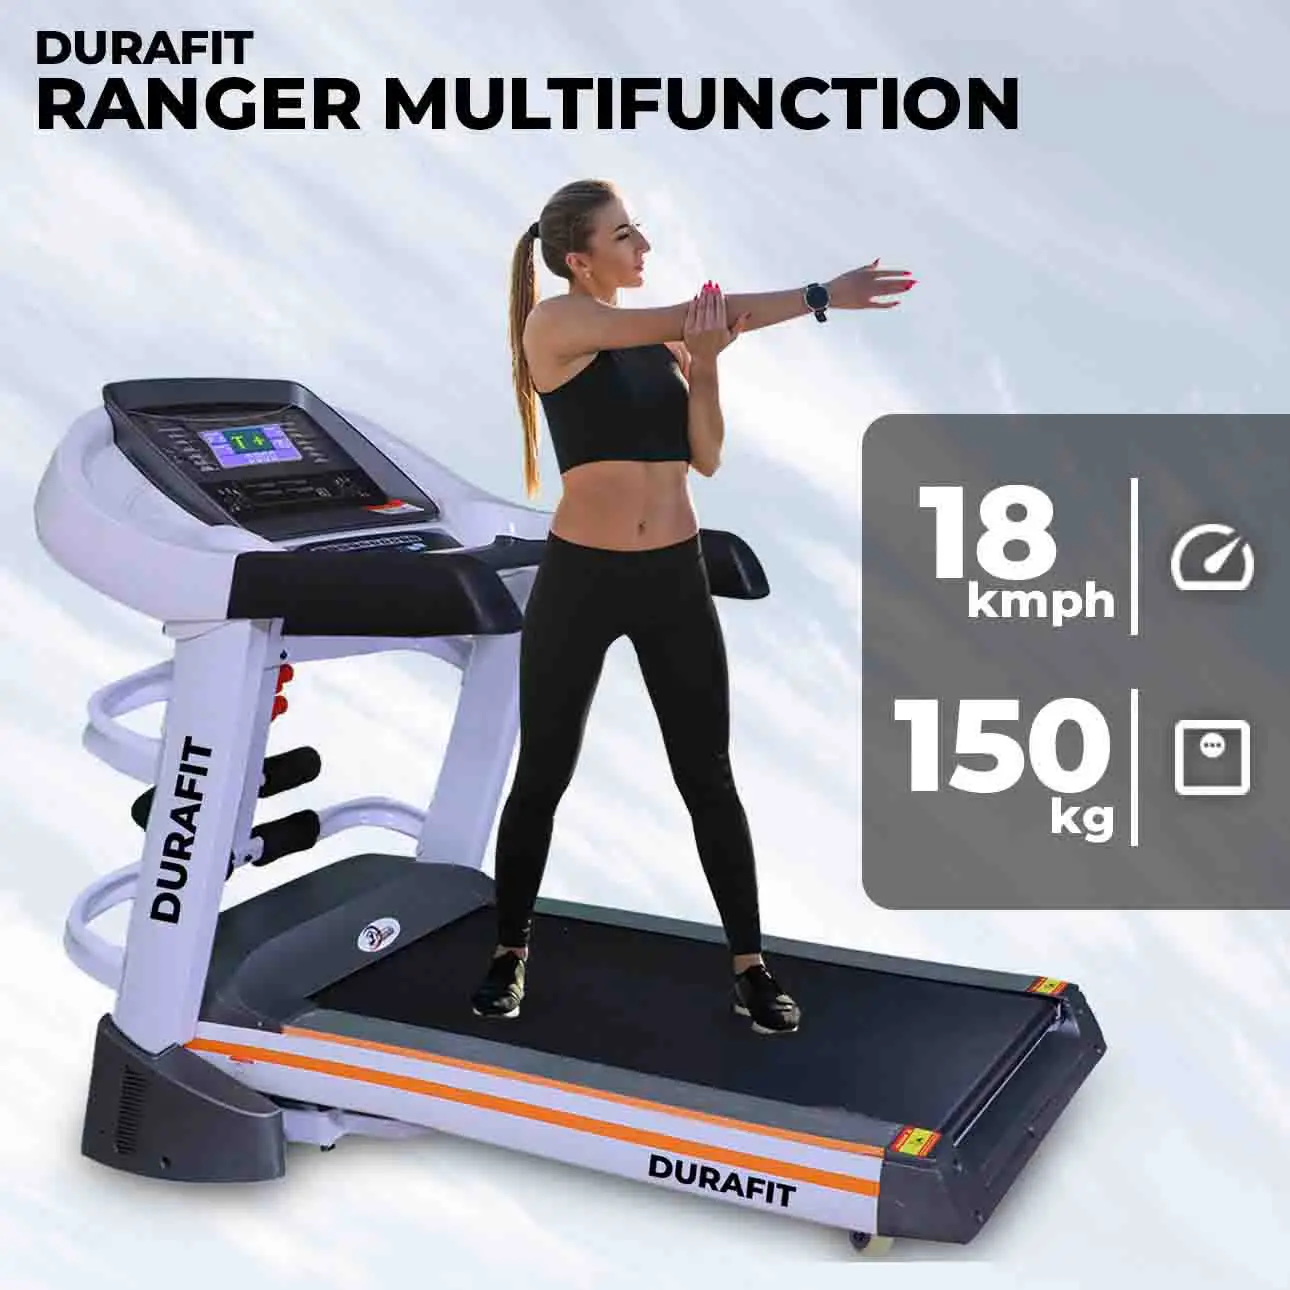 Durafit Ranger Multifunction Treadmill with max user weight 150kg